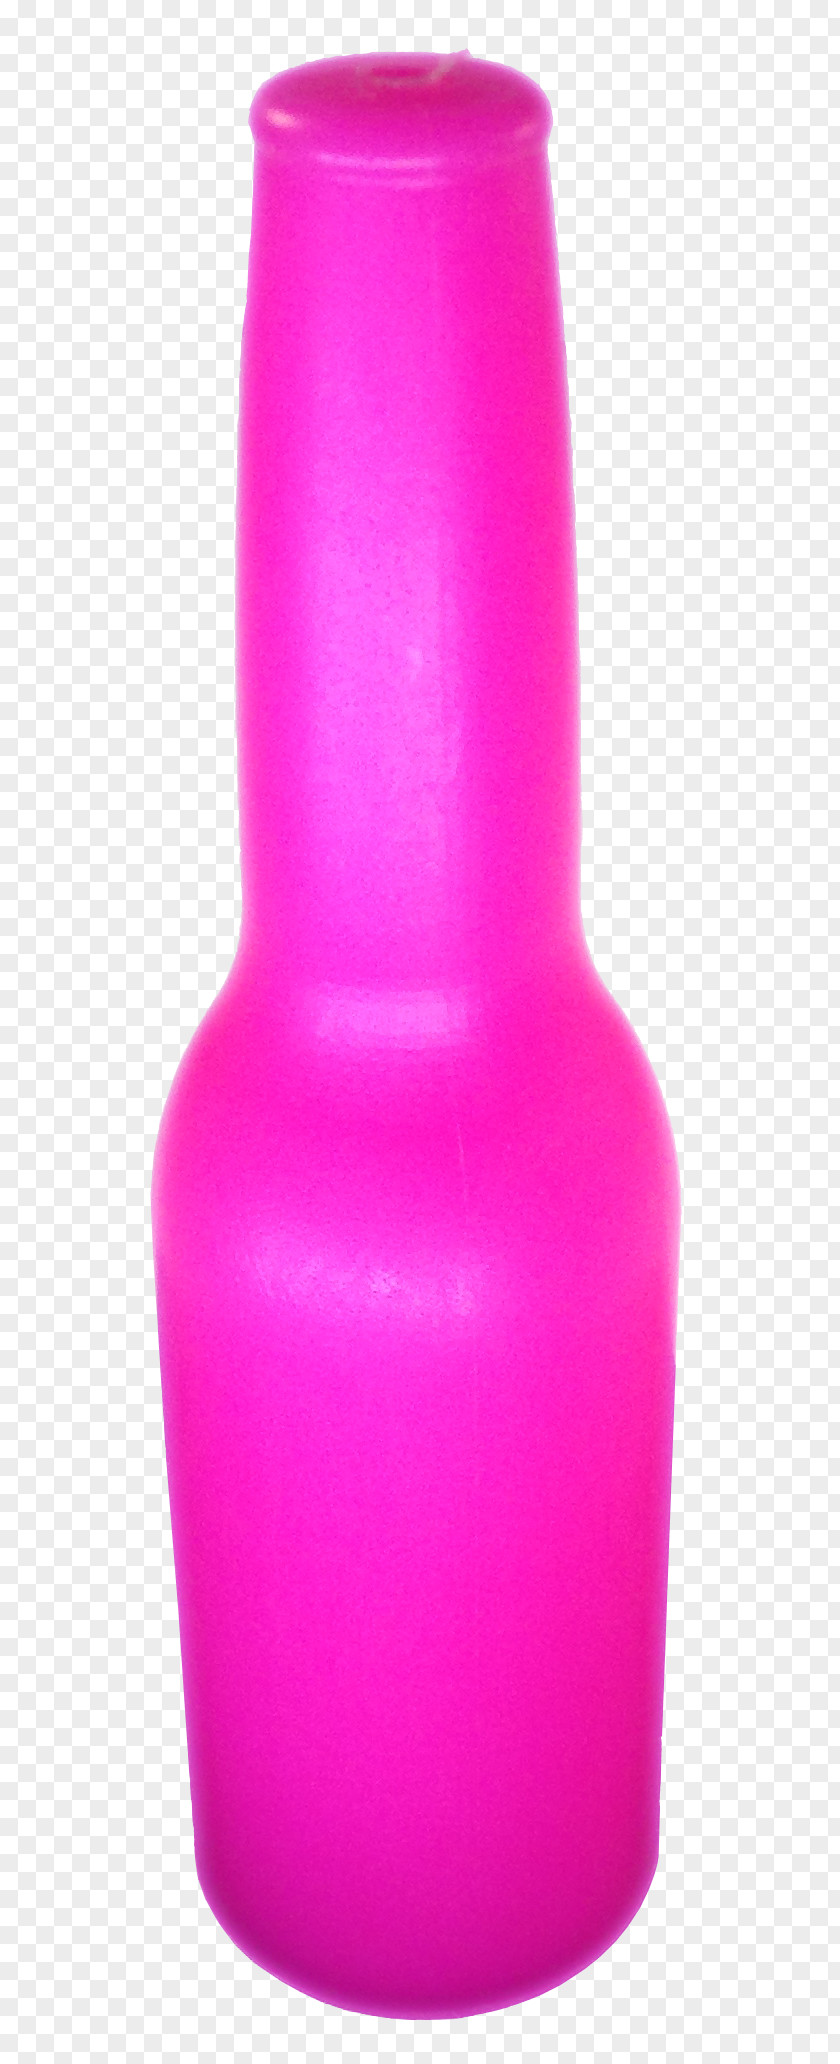 Pink Bowling Pin Water Bottle Picture Frames Vase Product Target Corporation PNG